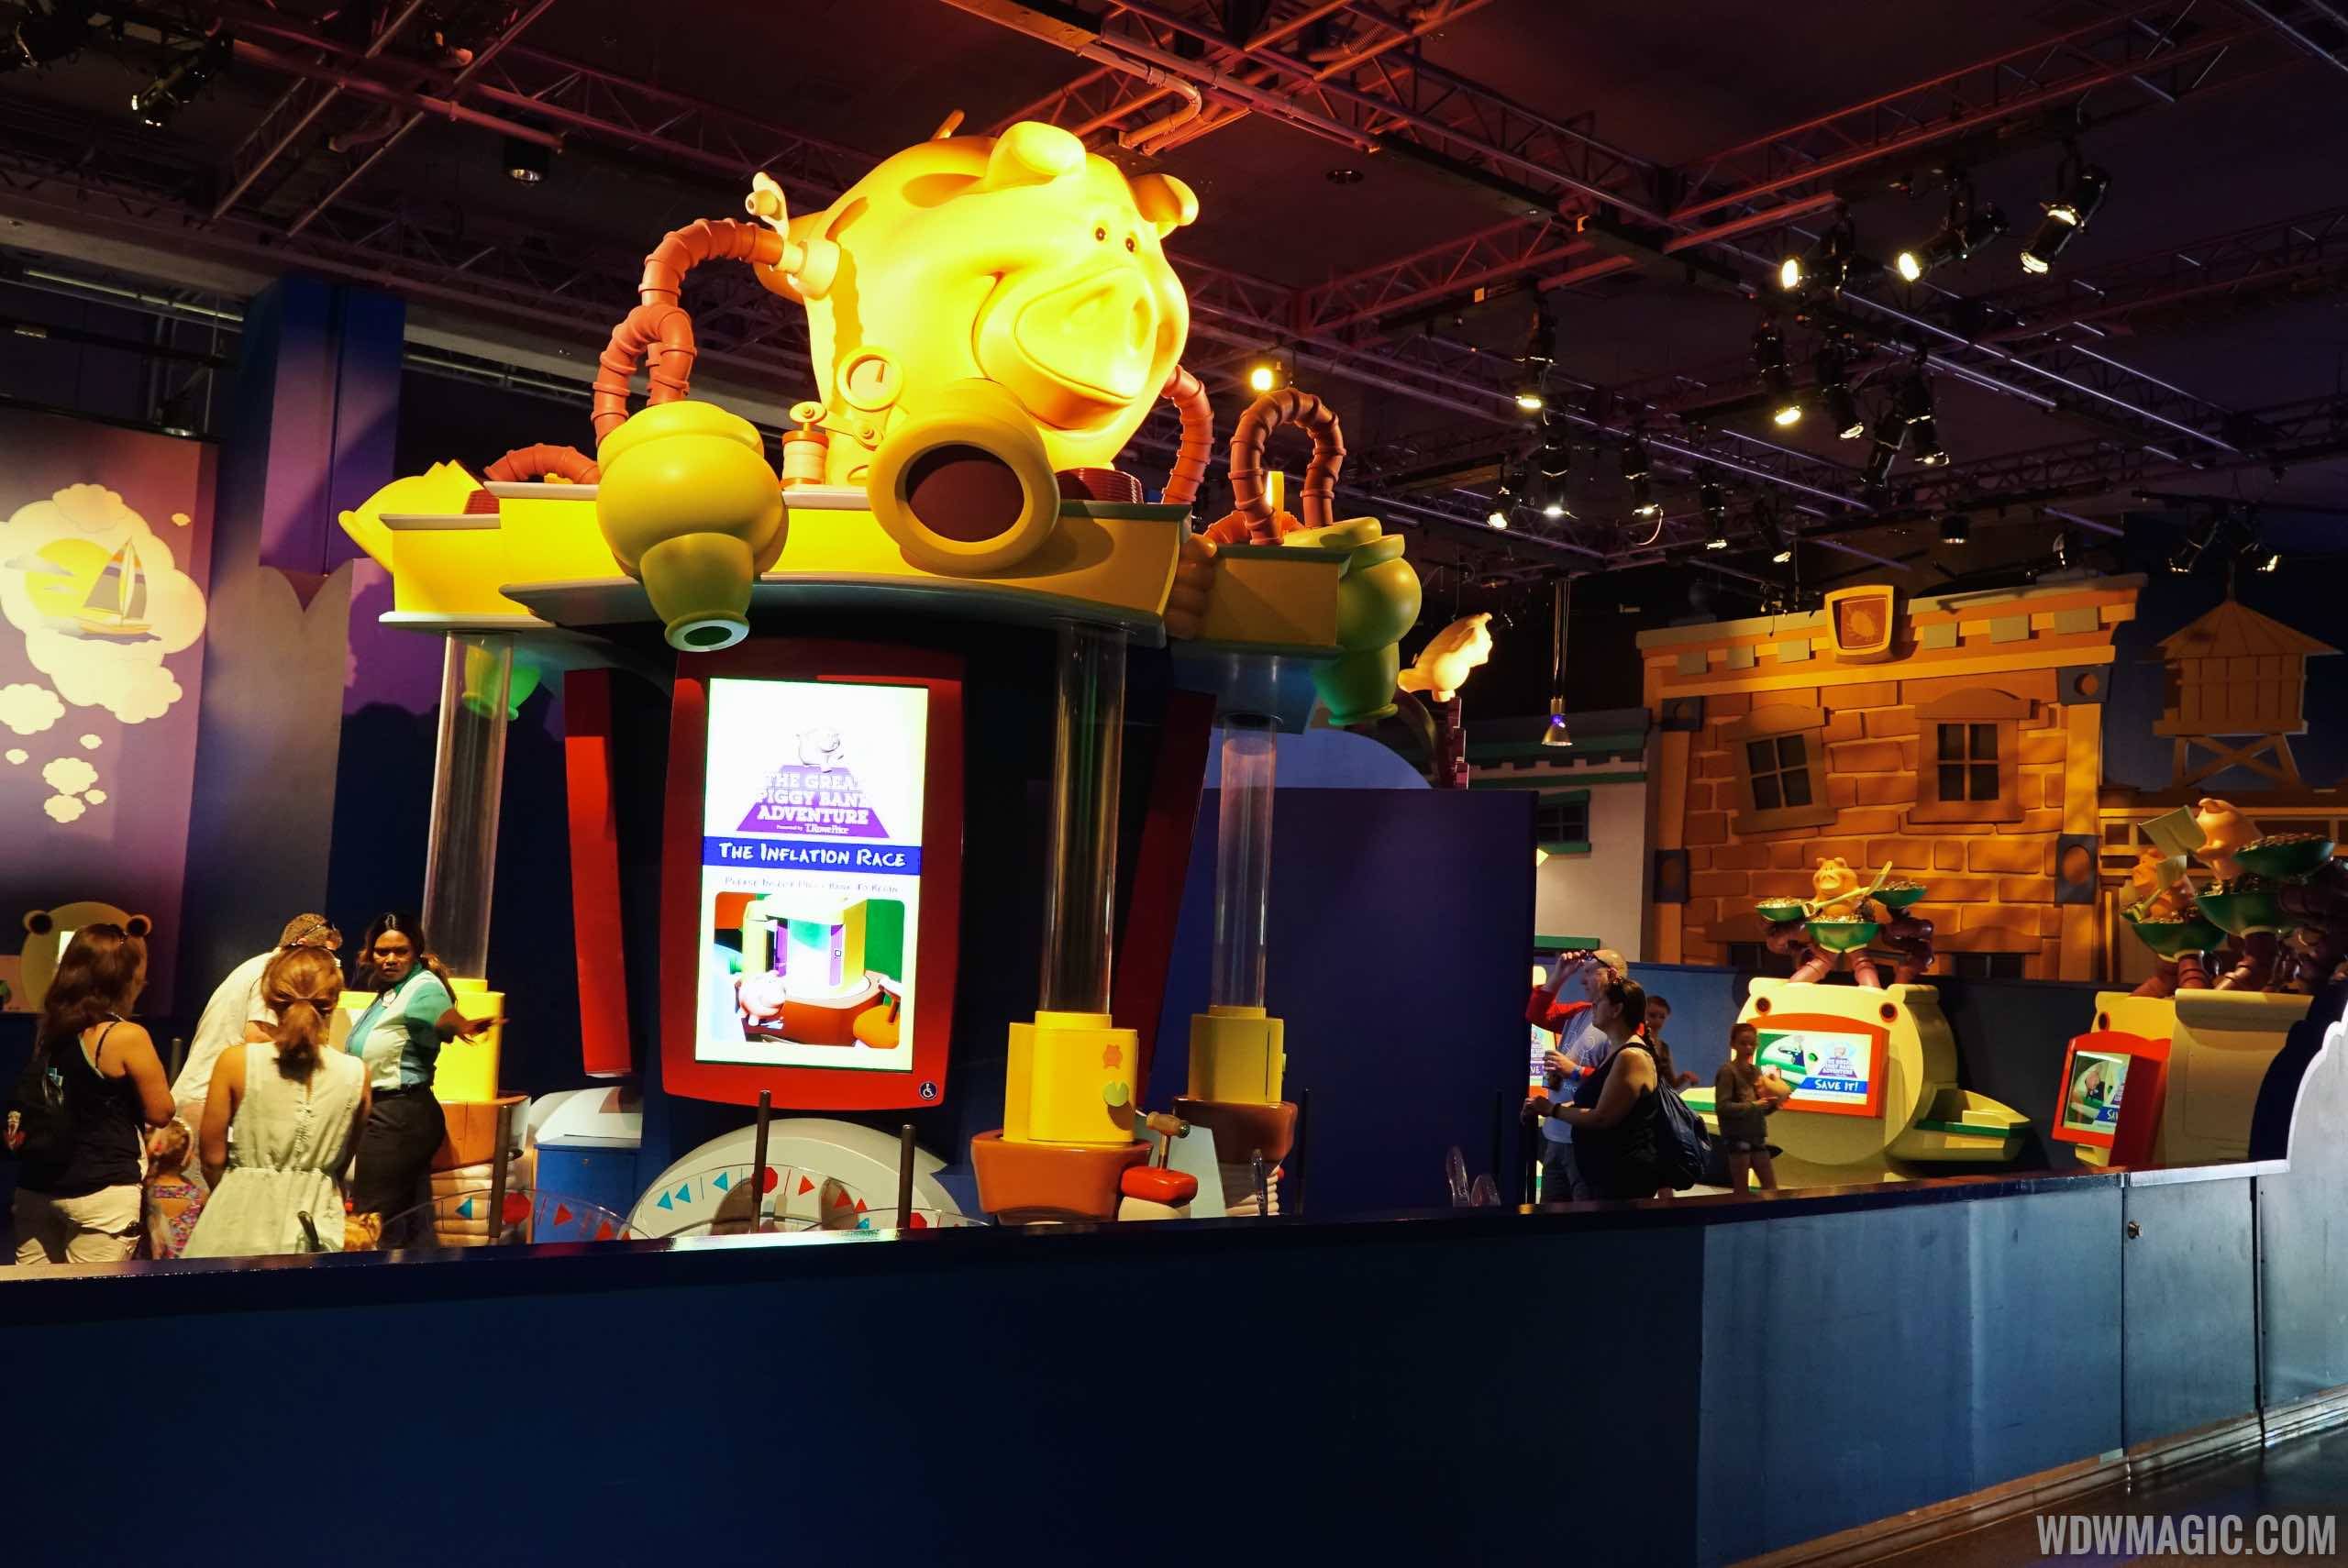 New interactive video game coming to Innoventions East